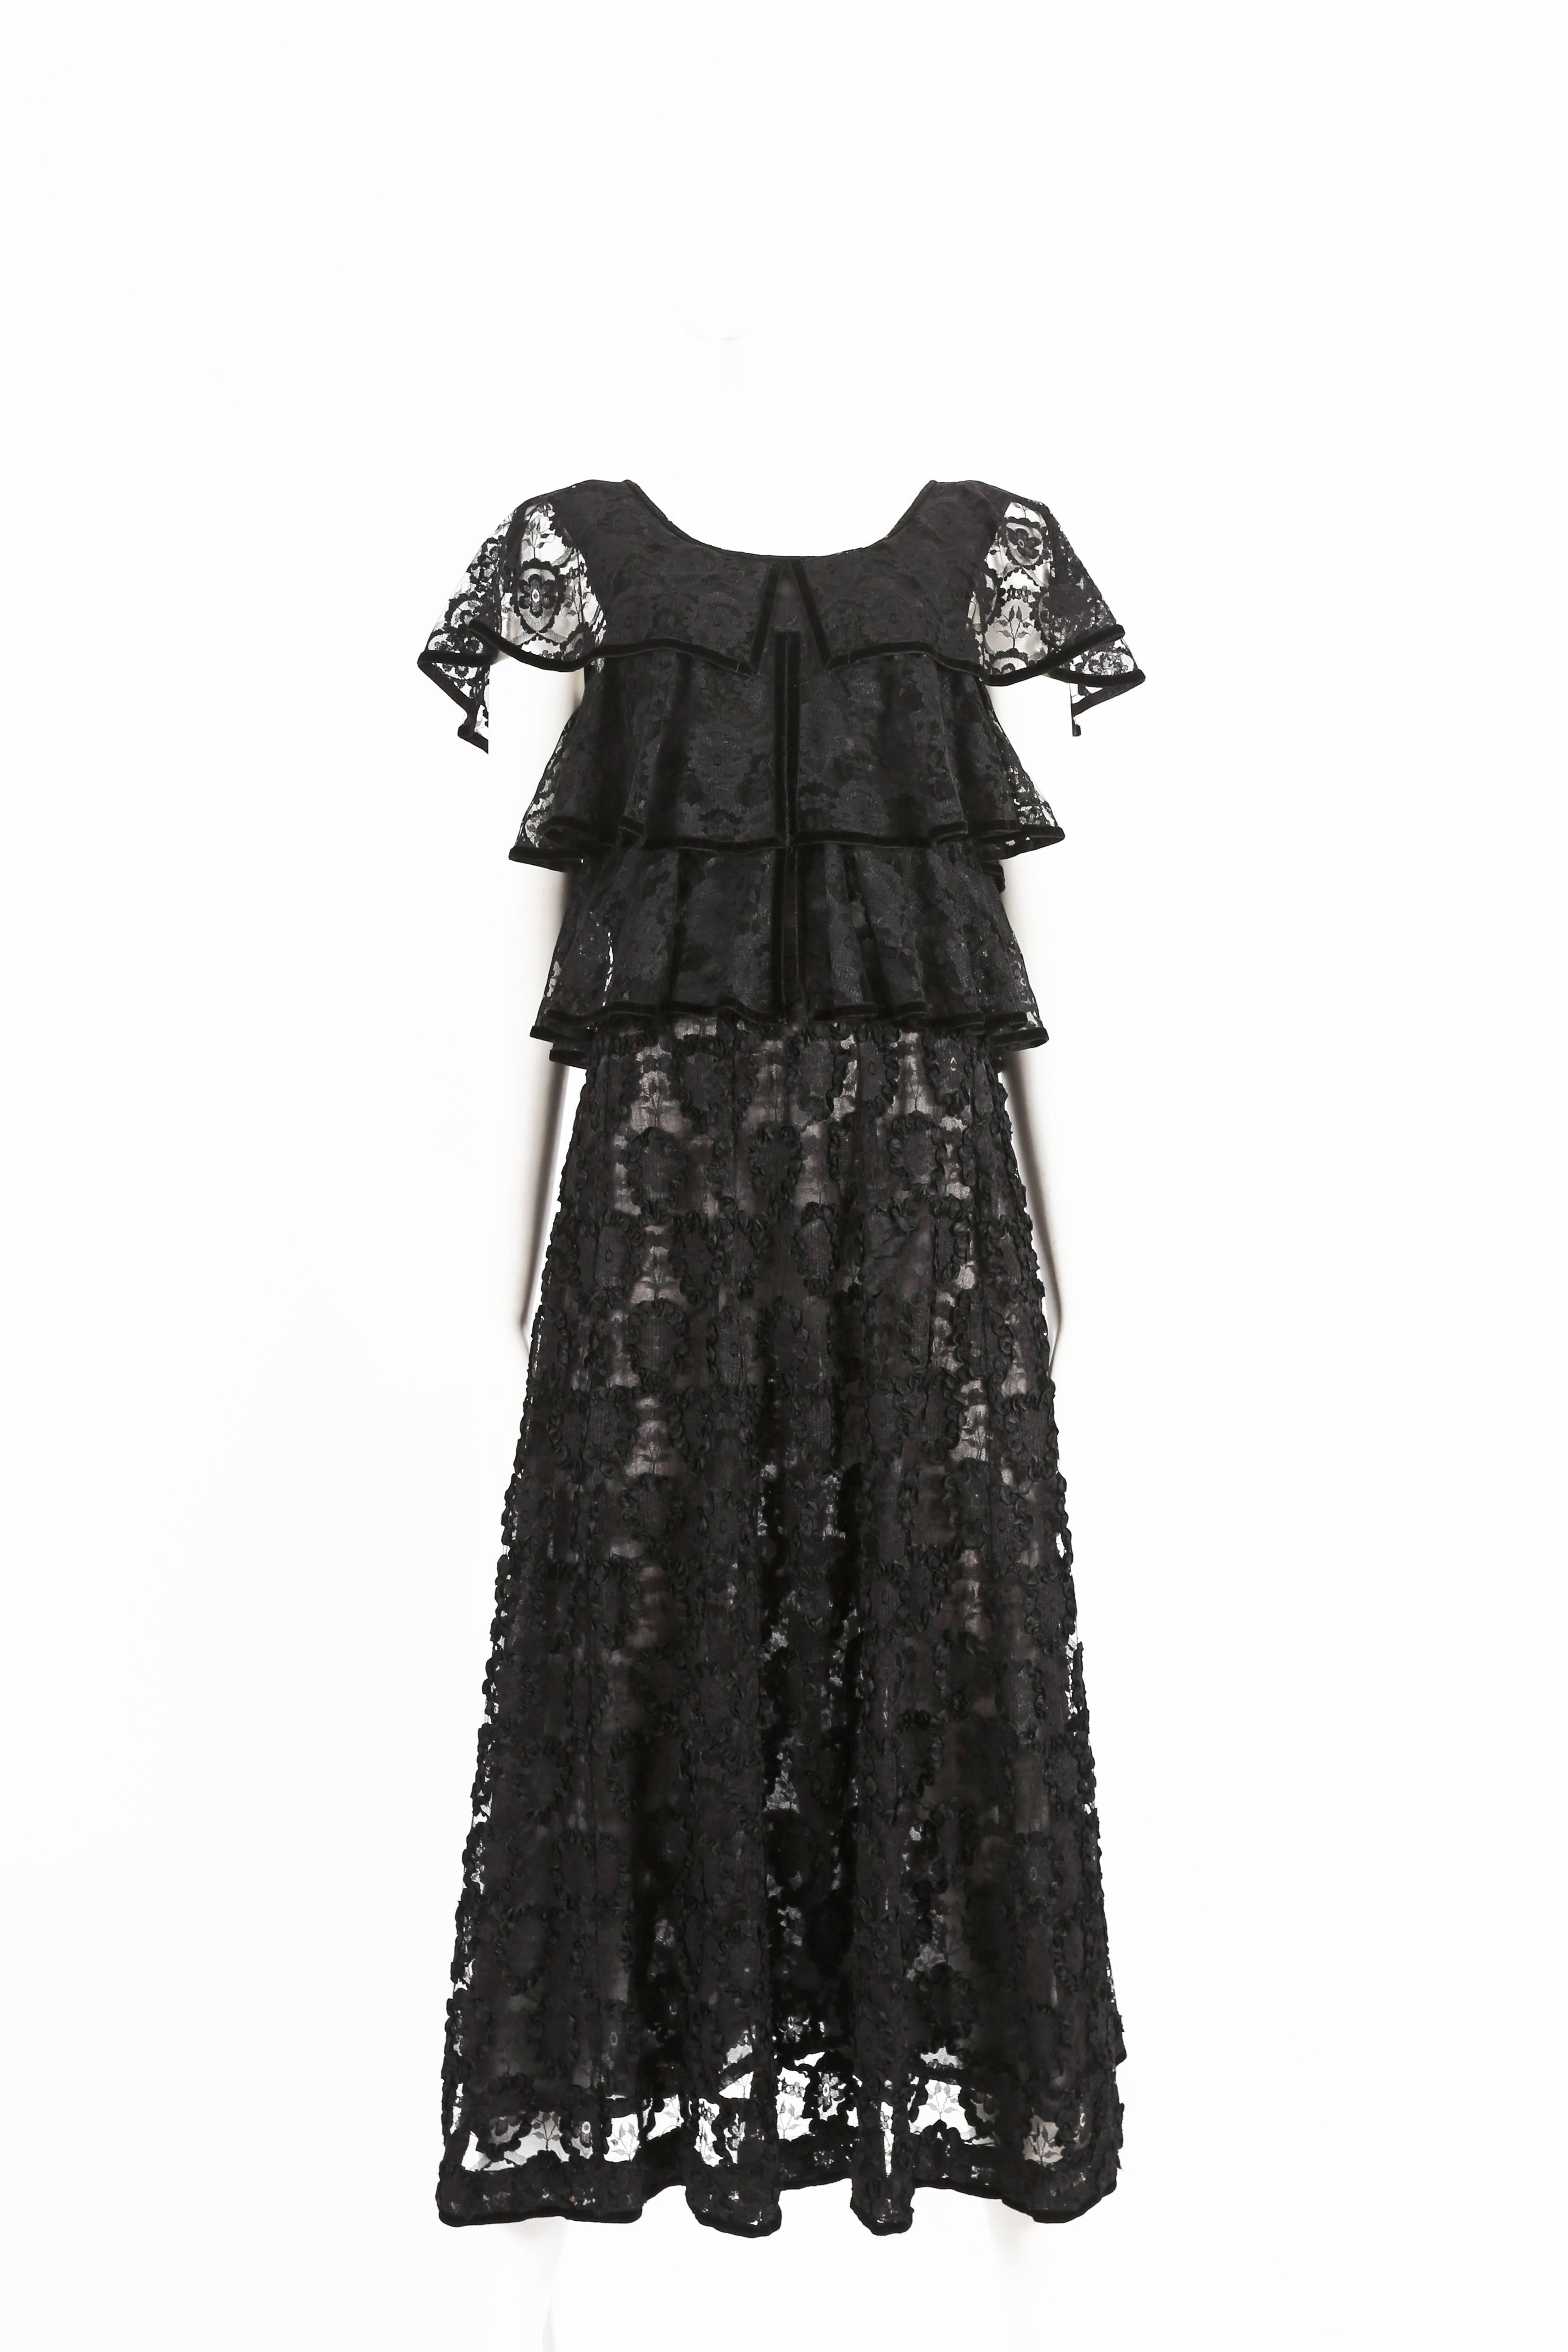 Thea Porter velvet trimmed lace evening dress with voile cotton underskirt, circa late 1960s